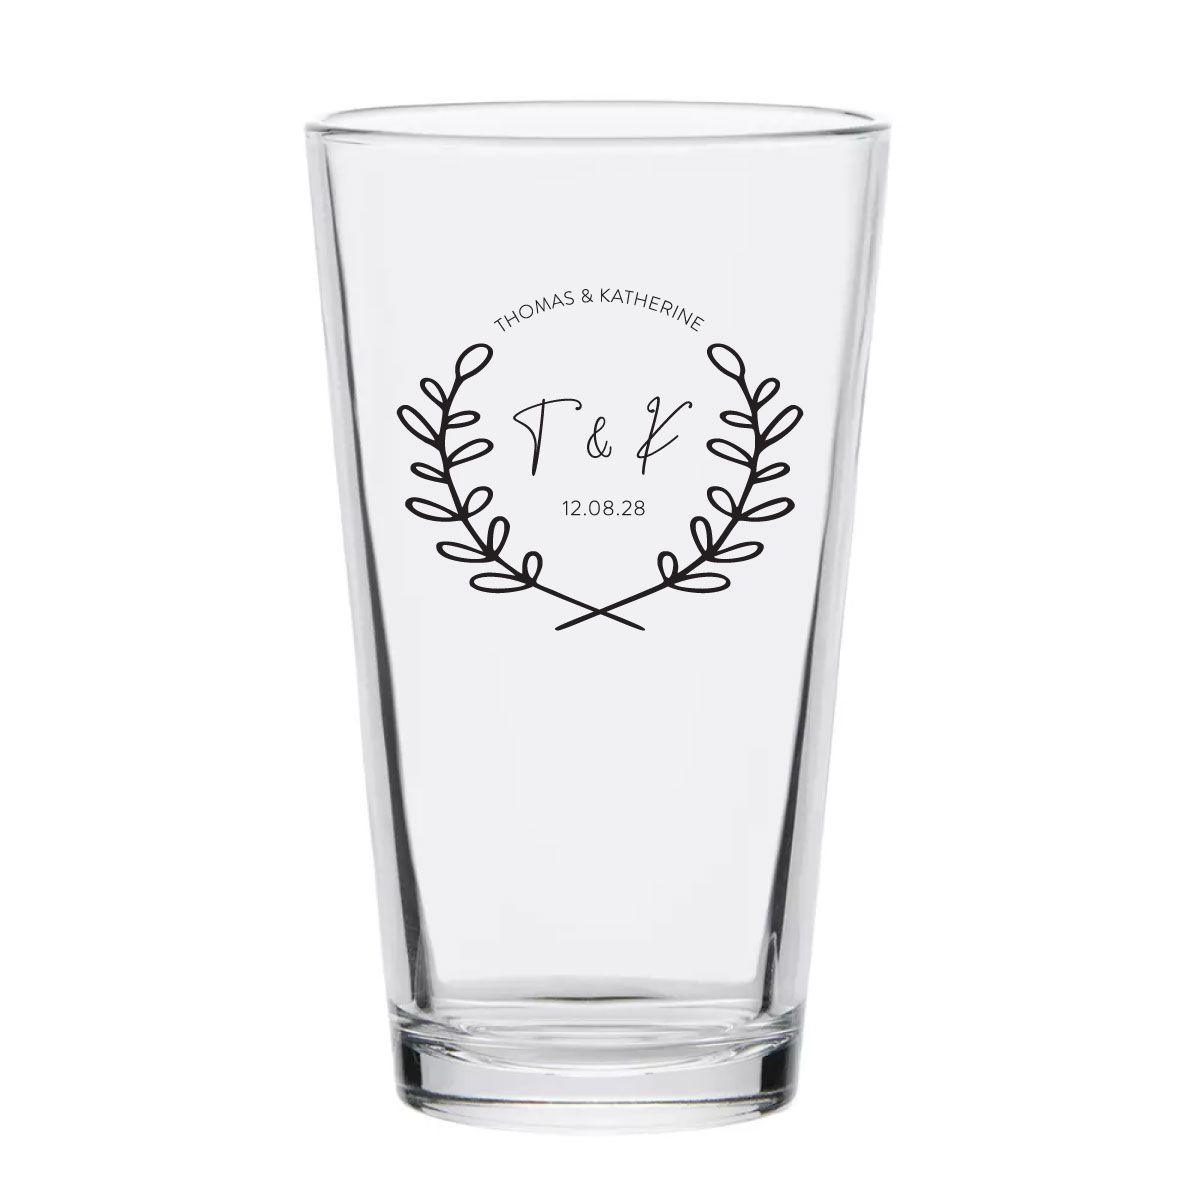 Personalized 16 oz. Pint Glasses